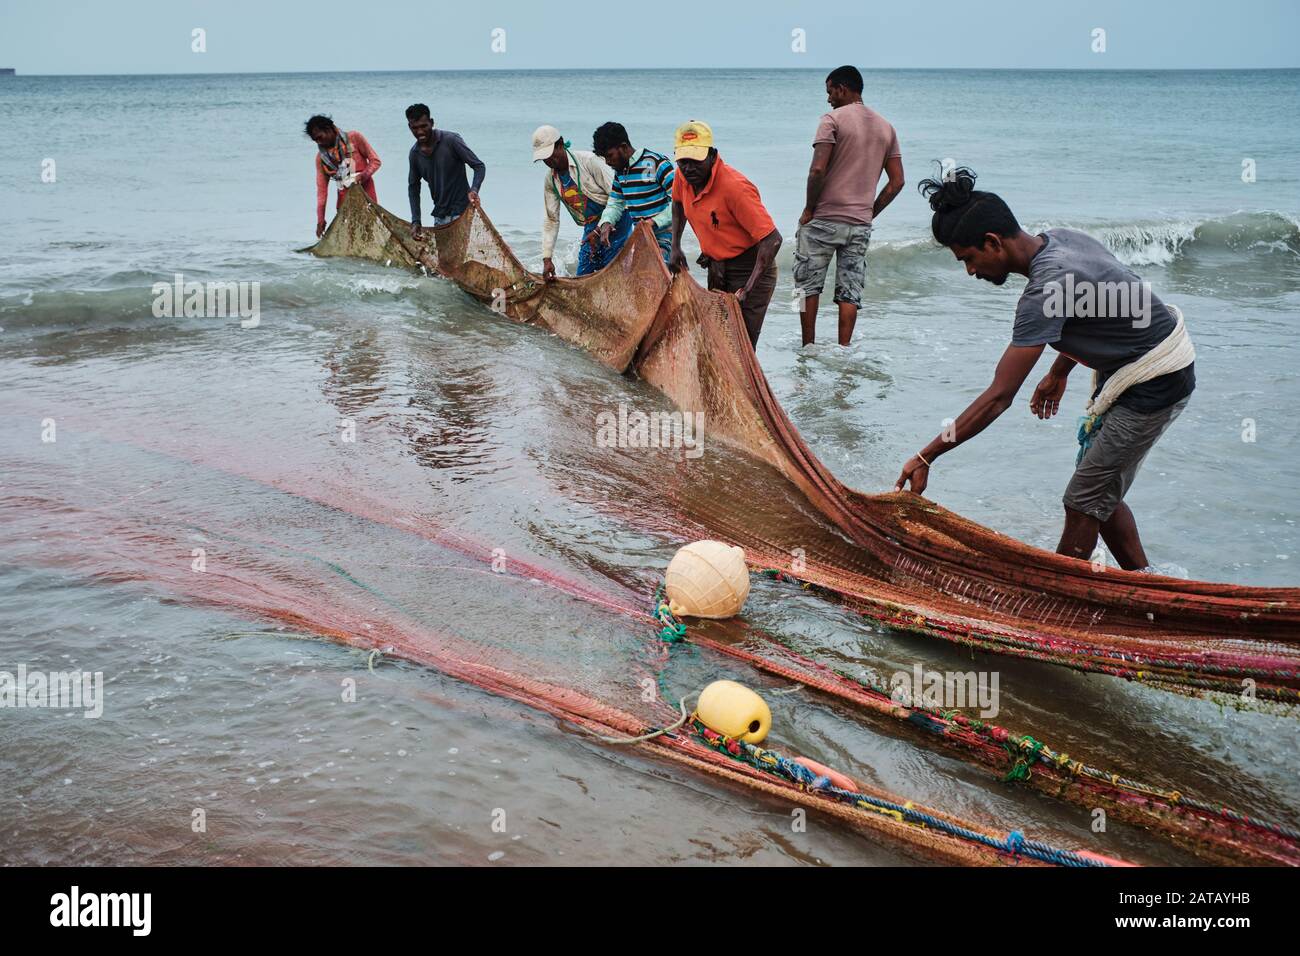 Fishermen pulling the nets out of the ocean on the beach in Sri